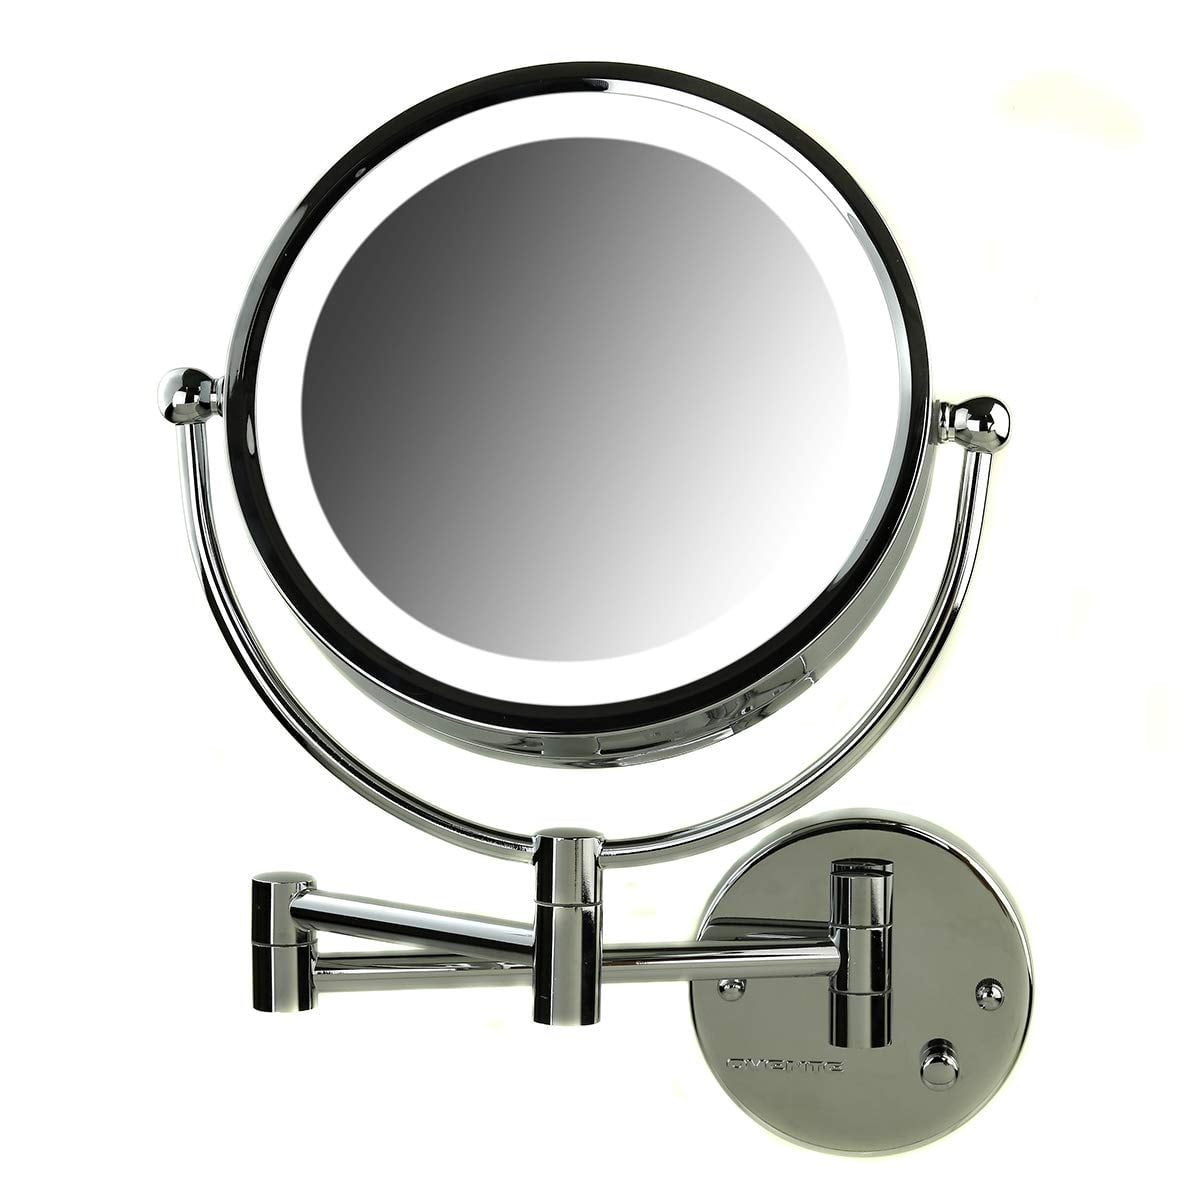 Ovente Lighted Wall Mounted Makeup, Best Hardwired Lighted Makeup Mirror